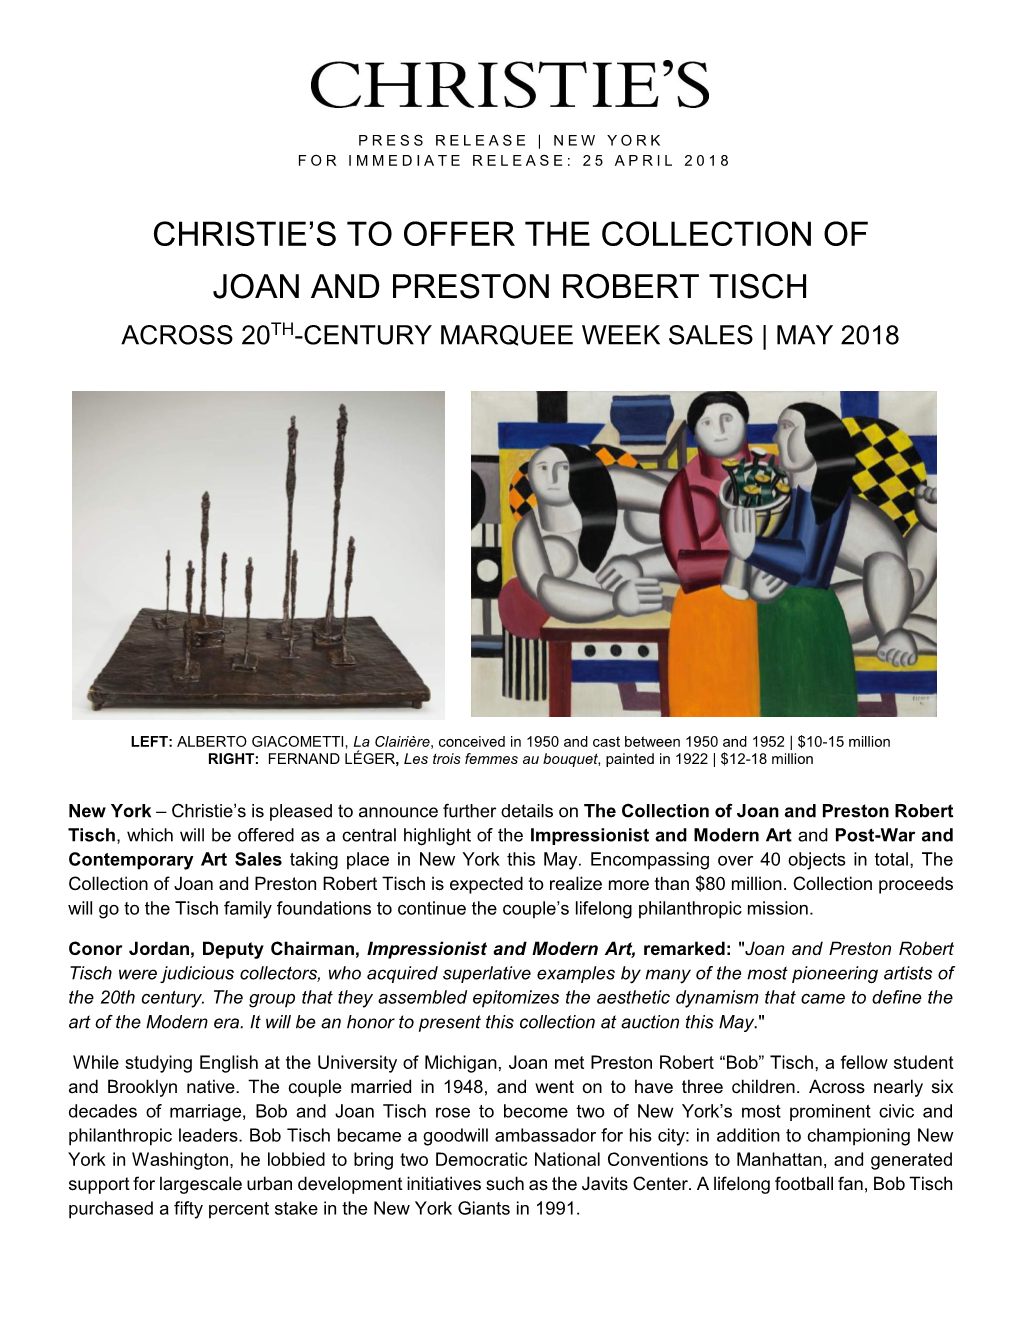 Christie's to Offer the Collection of Joan And